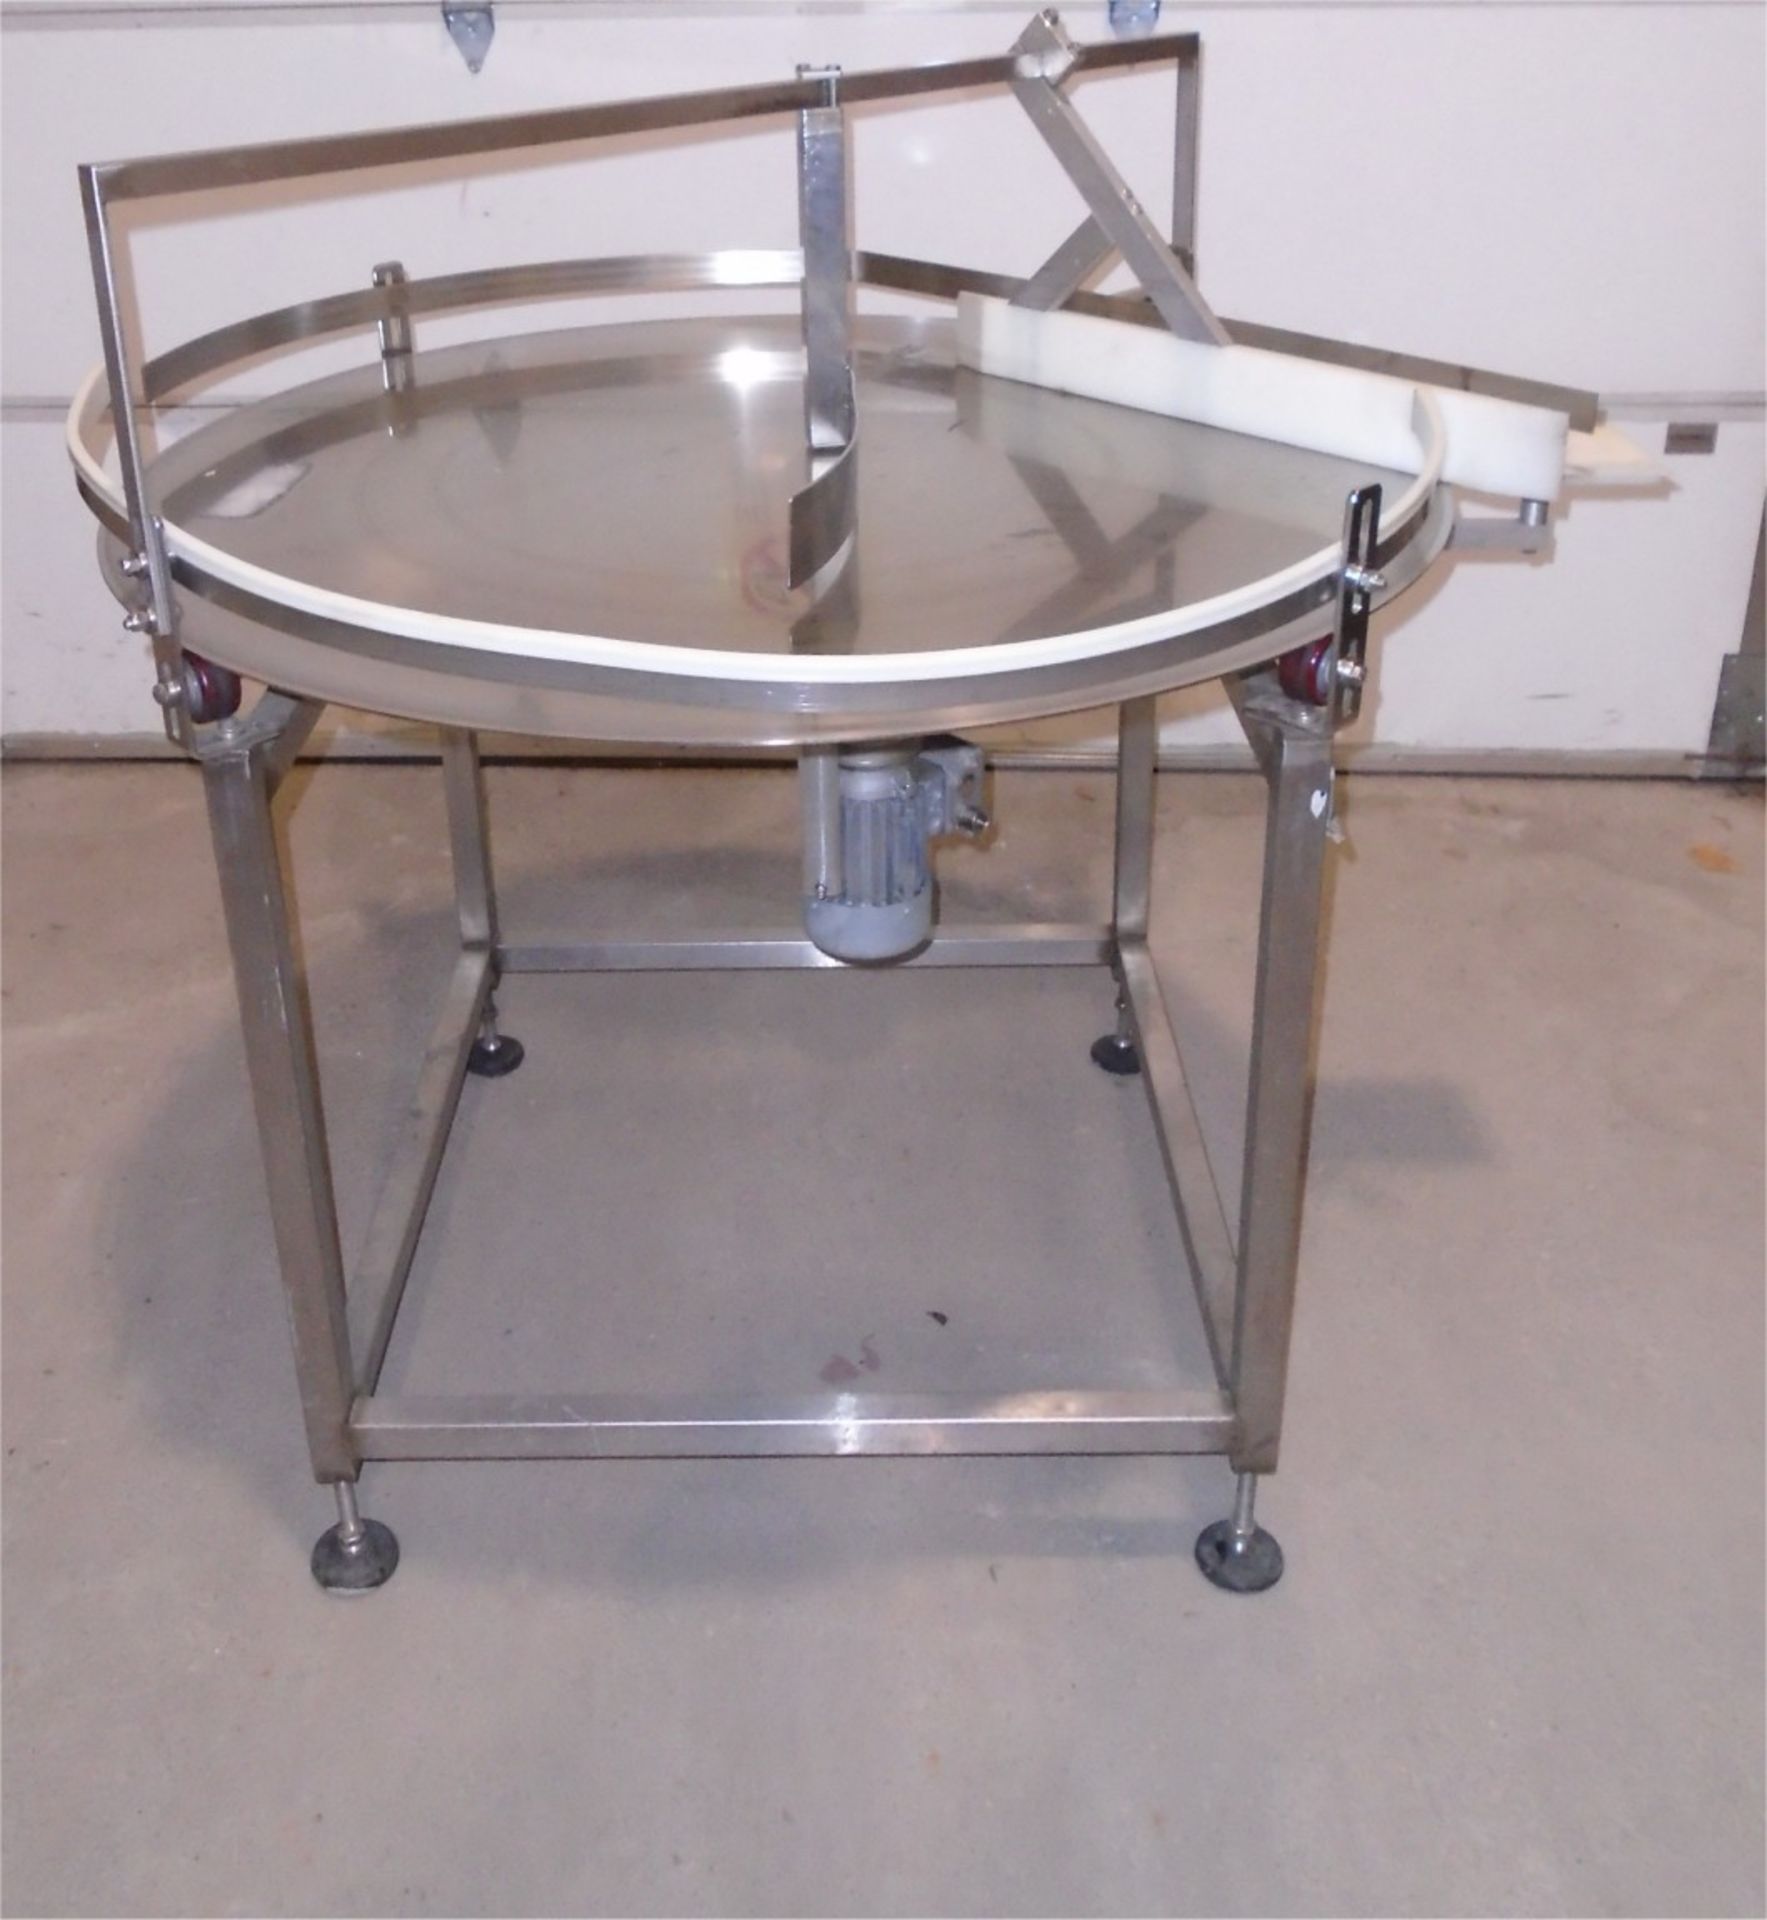 Used 48" Stainless Steel Feed Table. Height adjustable leveling legs. Electrics: 1Ph/60Hz/110Volts